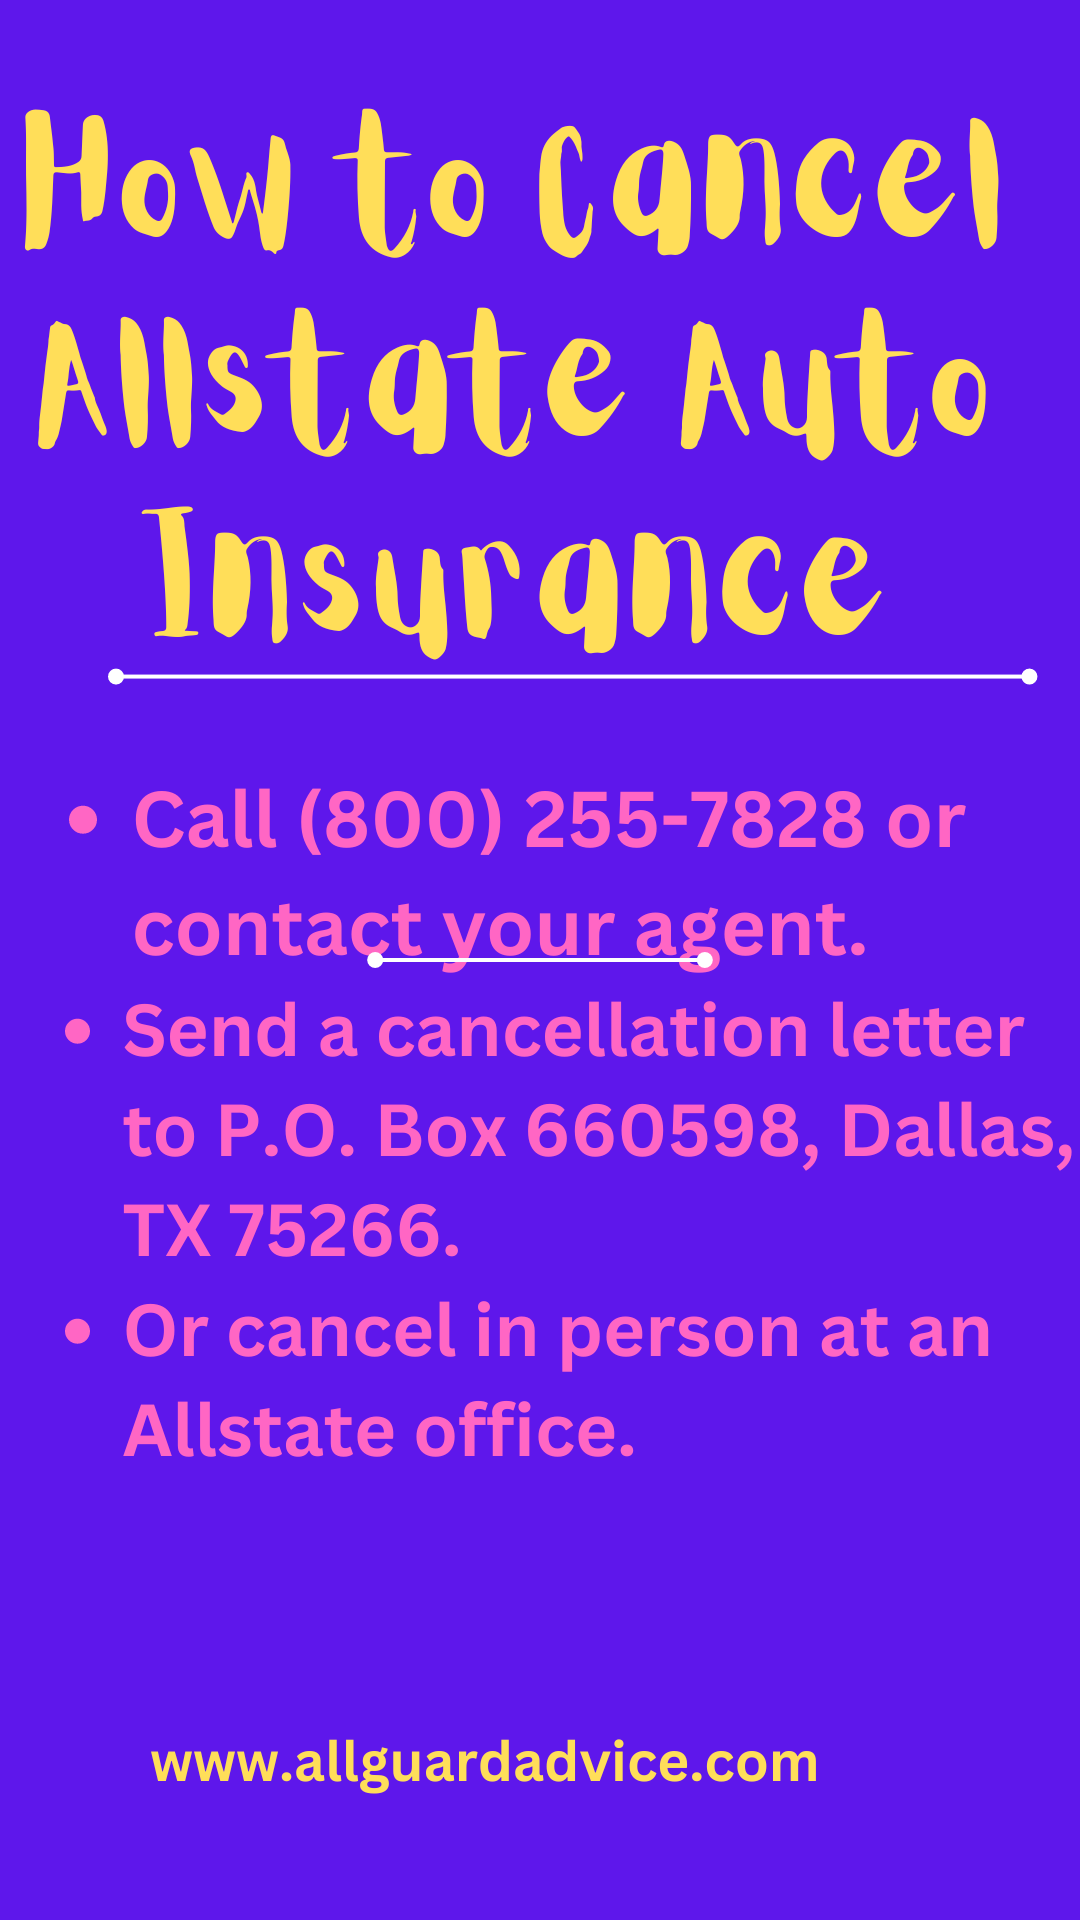 How to Cancel Allstate Auto Insurance